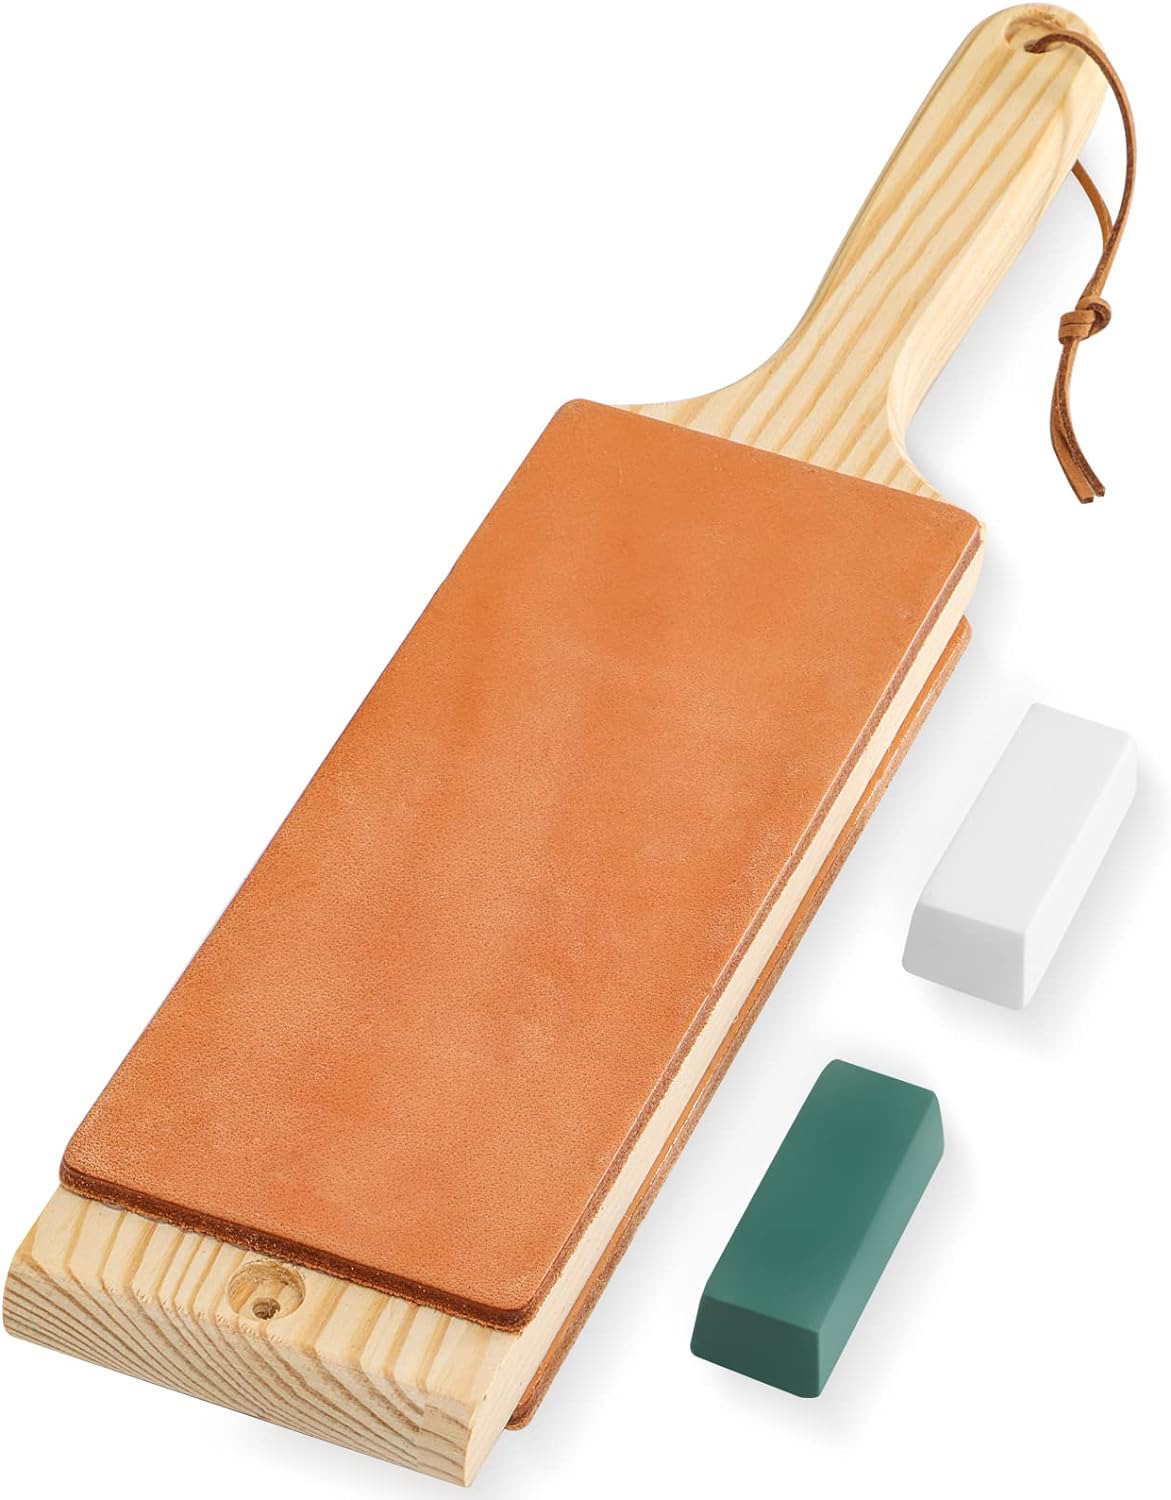 Double Sided Leather Strop Kit(14.3 X 3 Knife Stropping Leather)With Ergonomic